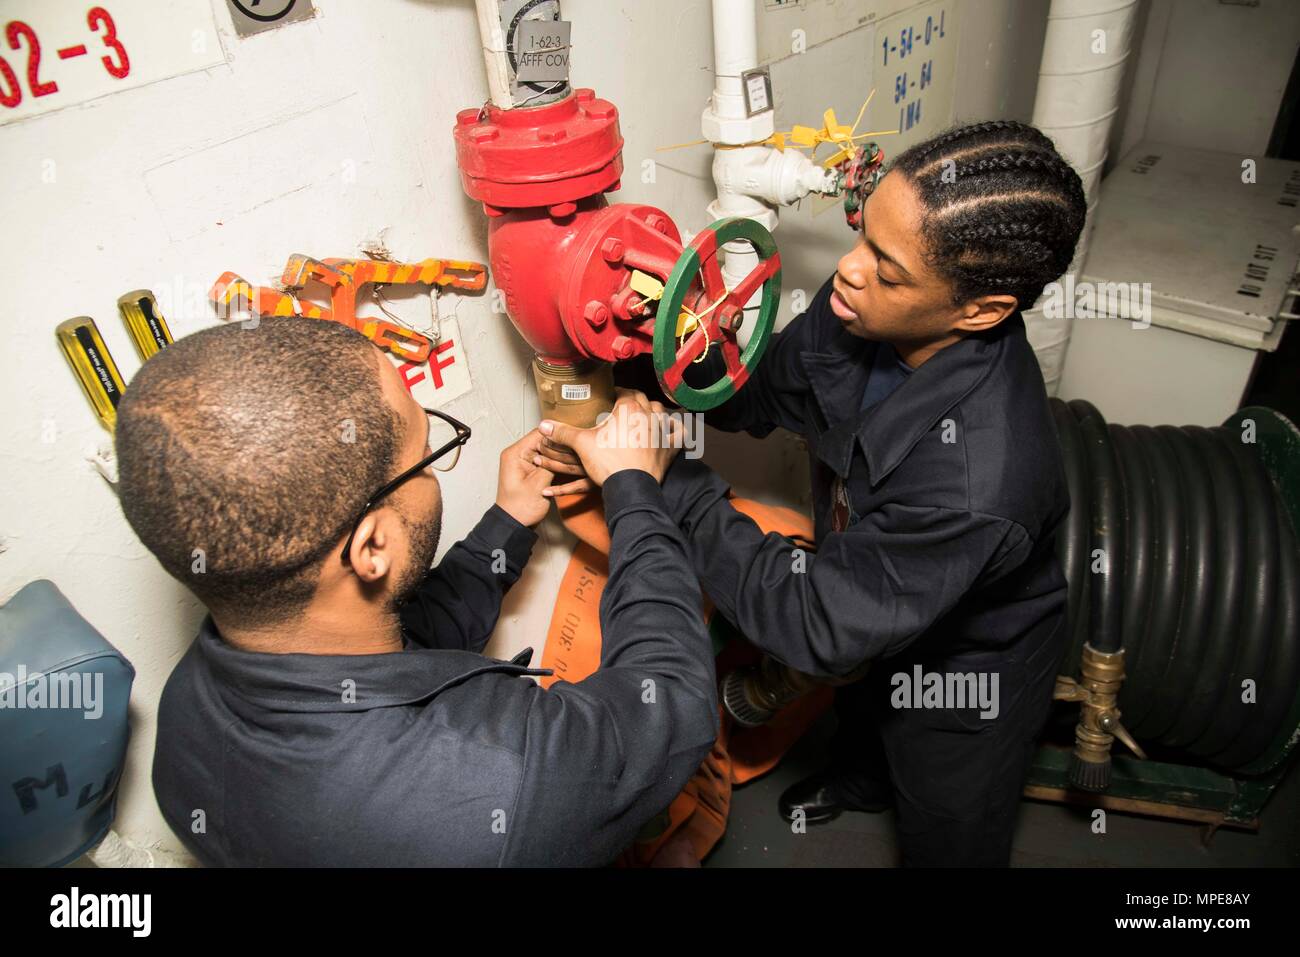 170209-N-KJ380-019  ATLANTIC OCEAN (Feb. 9, 2017) Aviation Ordnanceman Airman Levi Turner, left, from Atlanta, and Airman Yasmene Harris, from New York, attach a hose to a aqueous film-forming foam cut-out valve in the Aircraft Intermediate Maintenance Department tunnel aboard the aircraft carrier USS Dwight D. Eisenhower (CVN 69) (Ike). Ike is currently conducting aircraft carrier qualifications during the sustainment phase of the Optimized Fleet Response Plan (OFRP). (U.S. Navy photo by Mass Communication Specialist Seaman Neo Greene III) Stock Photo